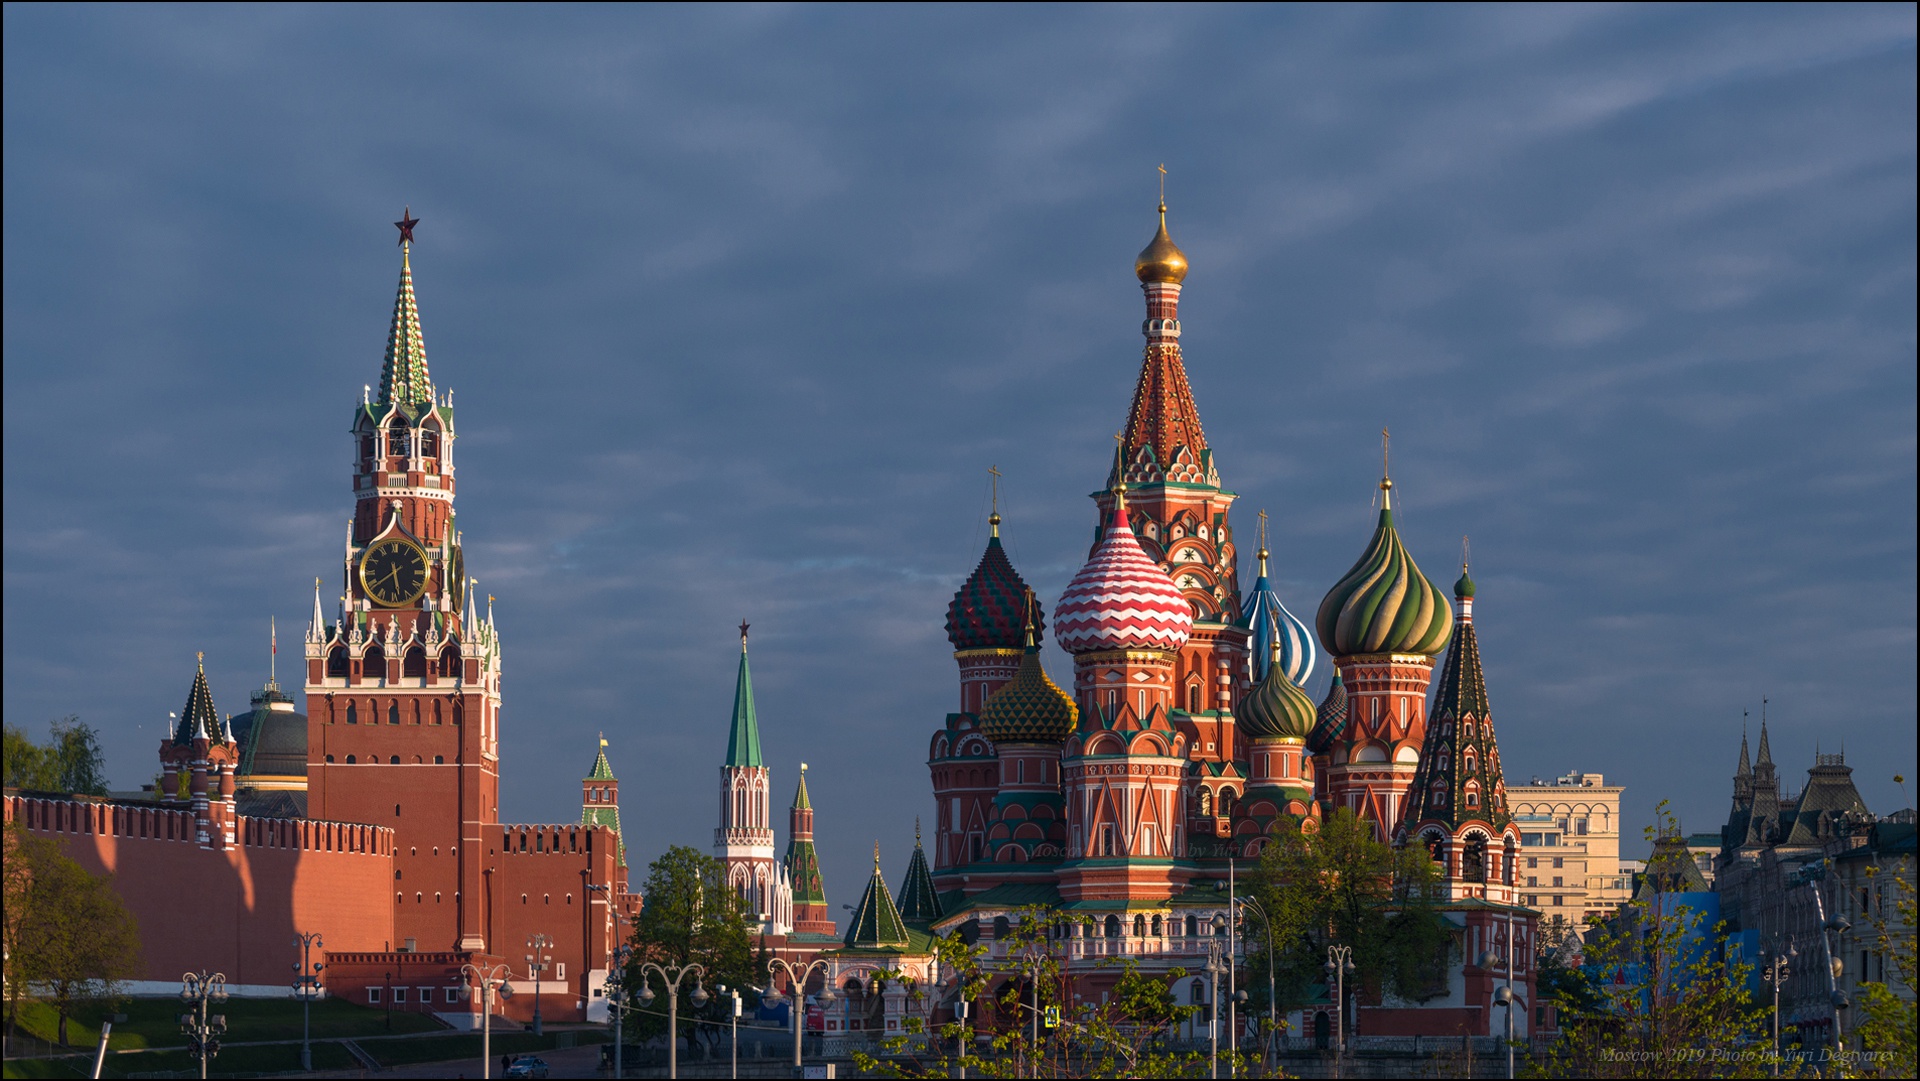 religious, saint basil's cathedral, kremlin, moscow, red square, russia, spasskaya tower, cathedrals